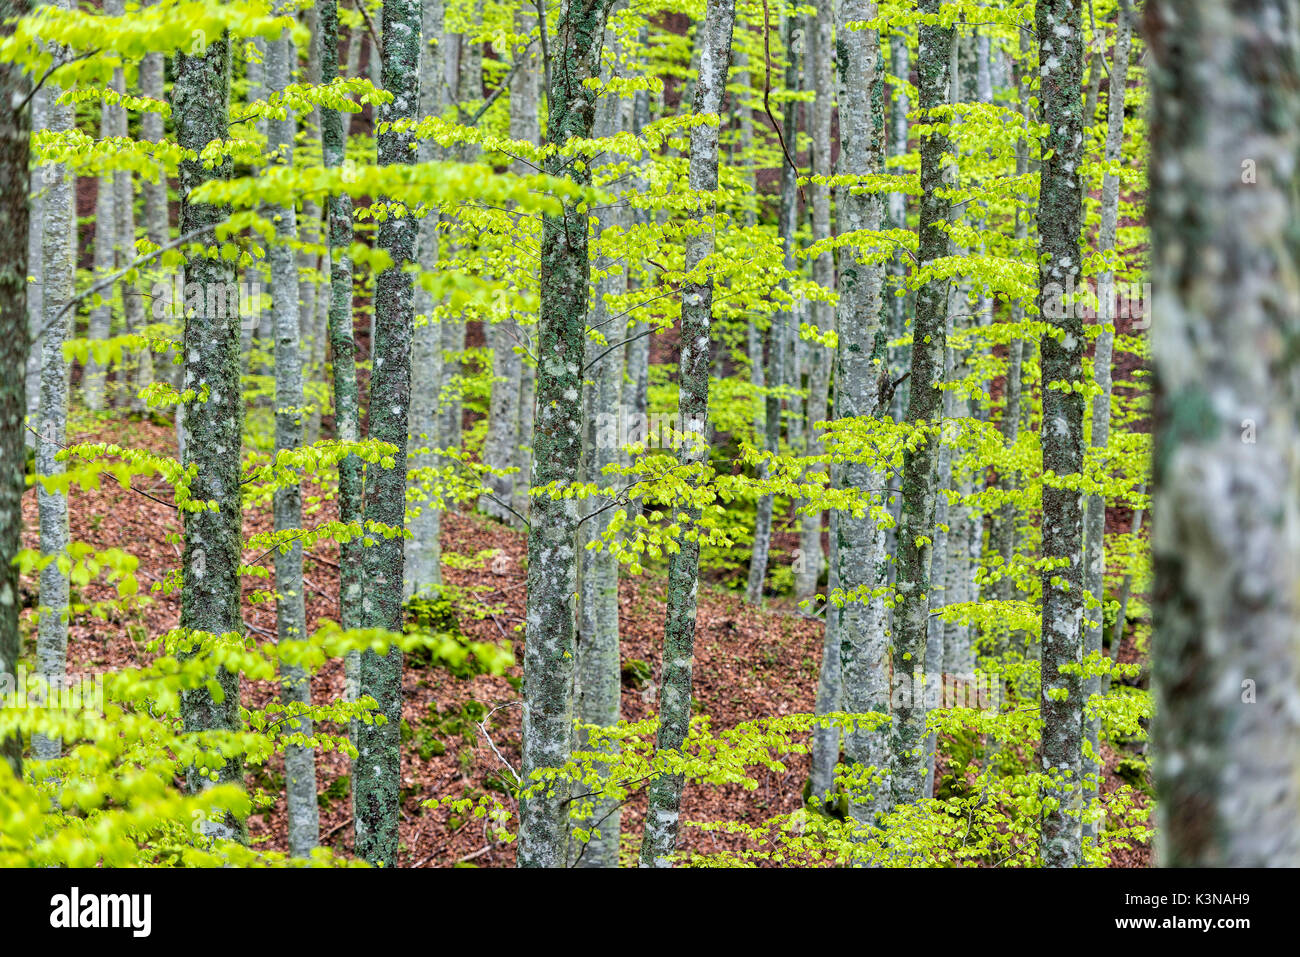 Forest in Autumn, Foreste Casentinesi NP, Emilia Romagna district, Italy Stock Photo